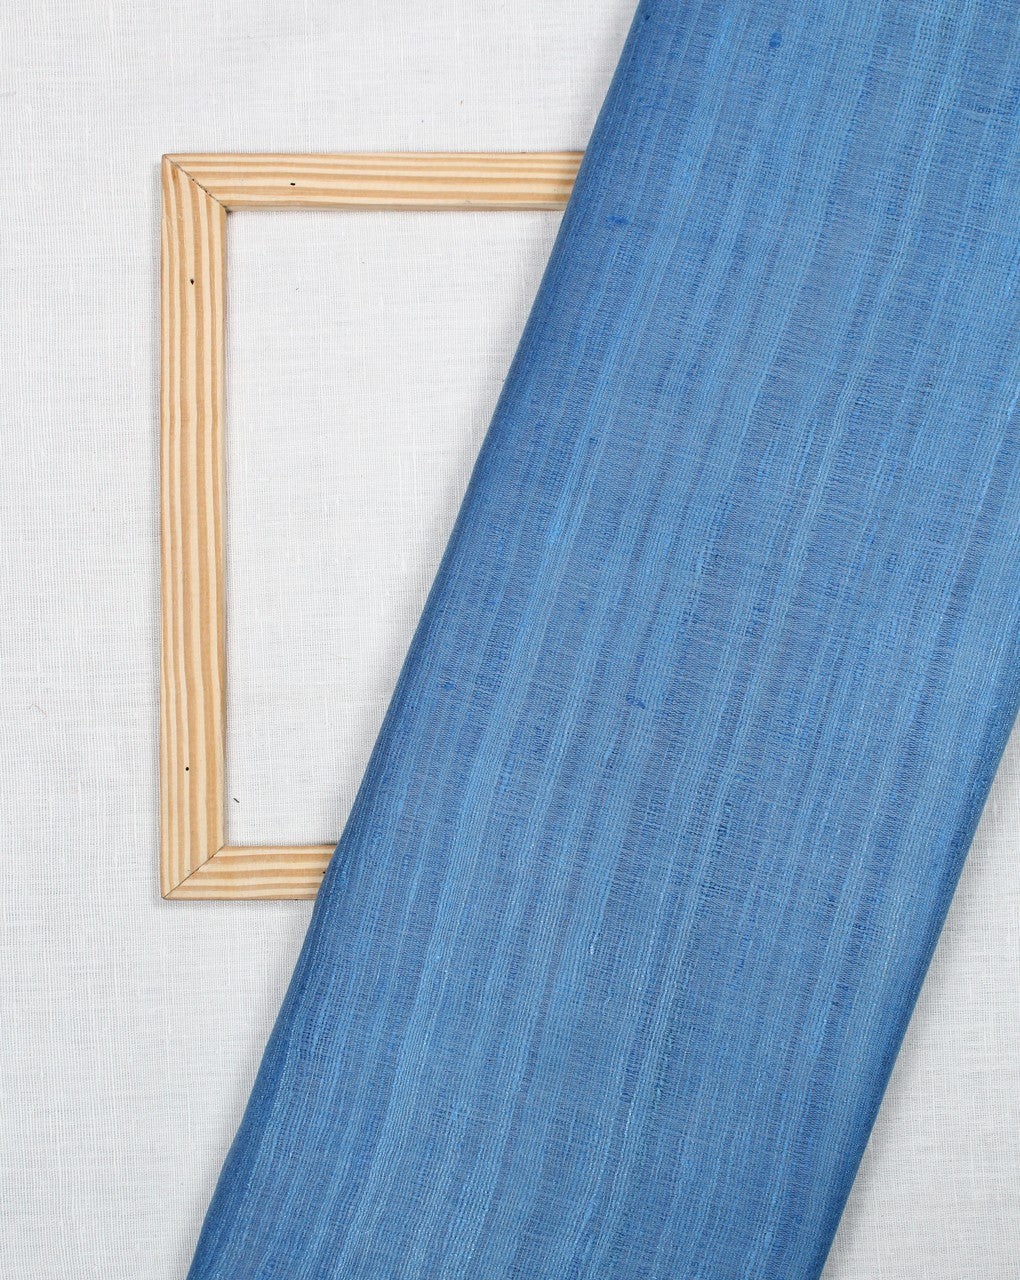 Buy Blue Plain Khadi Rayon Fabric for Best Price, Reviews, Free Shipping